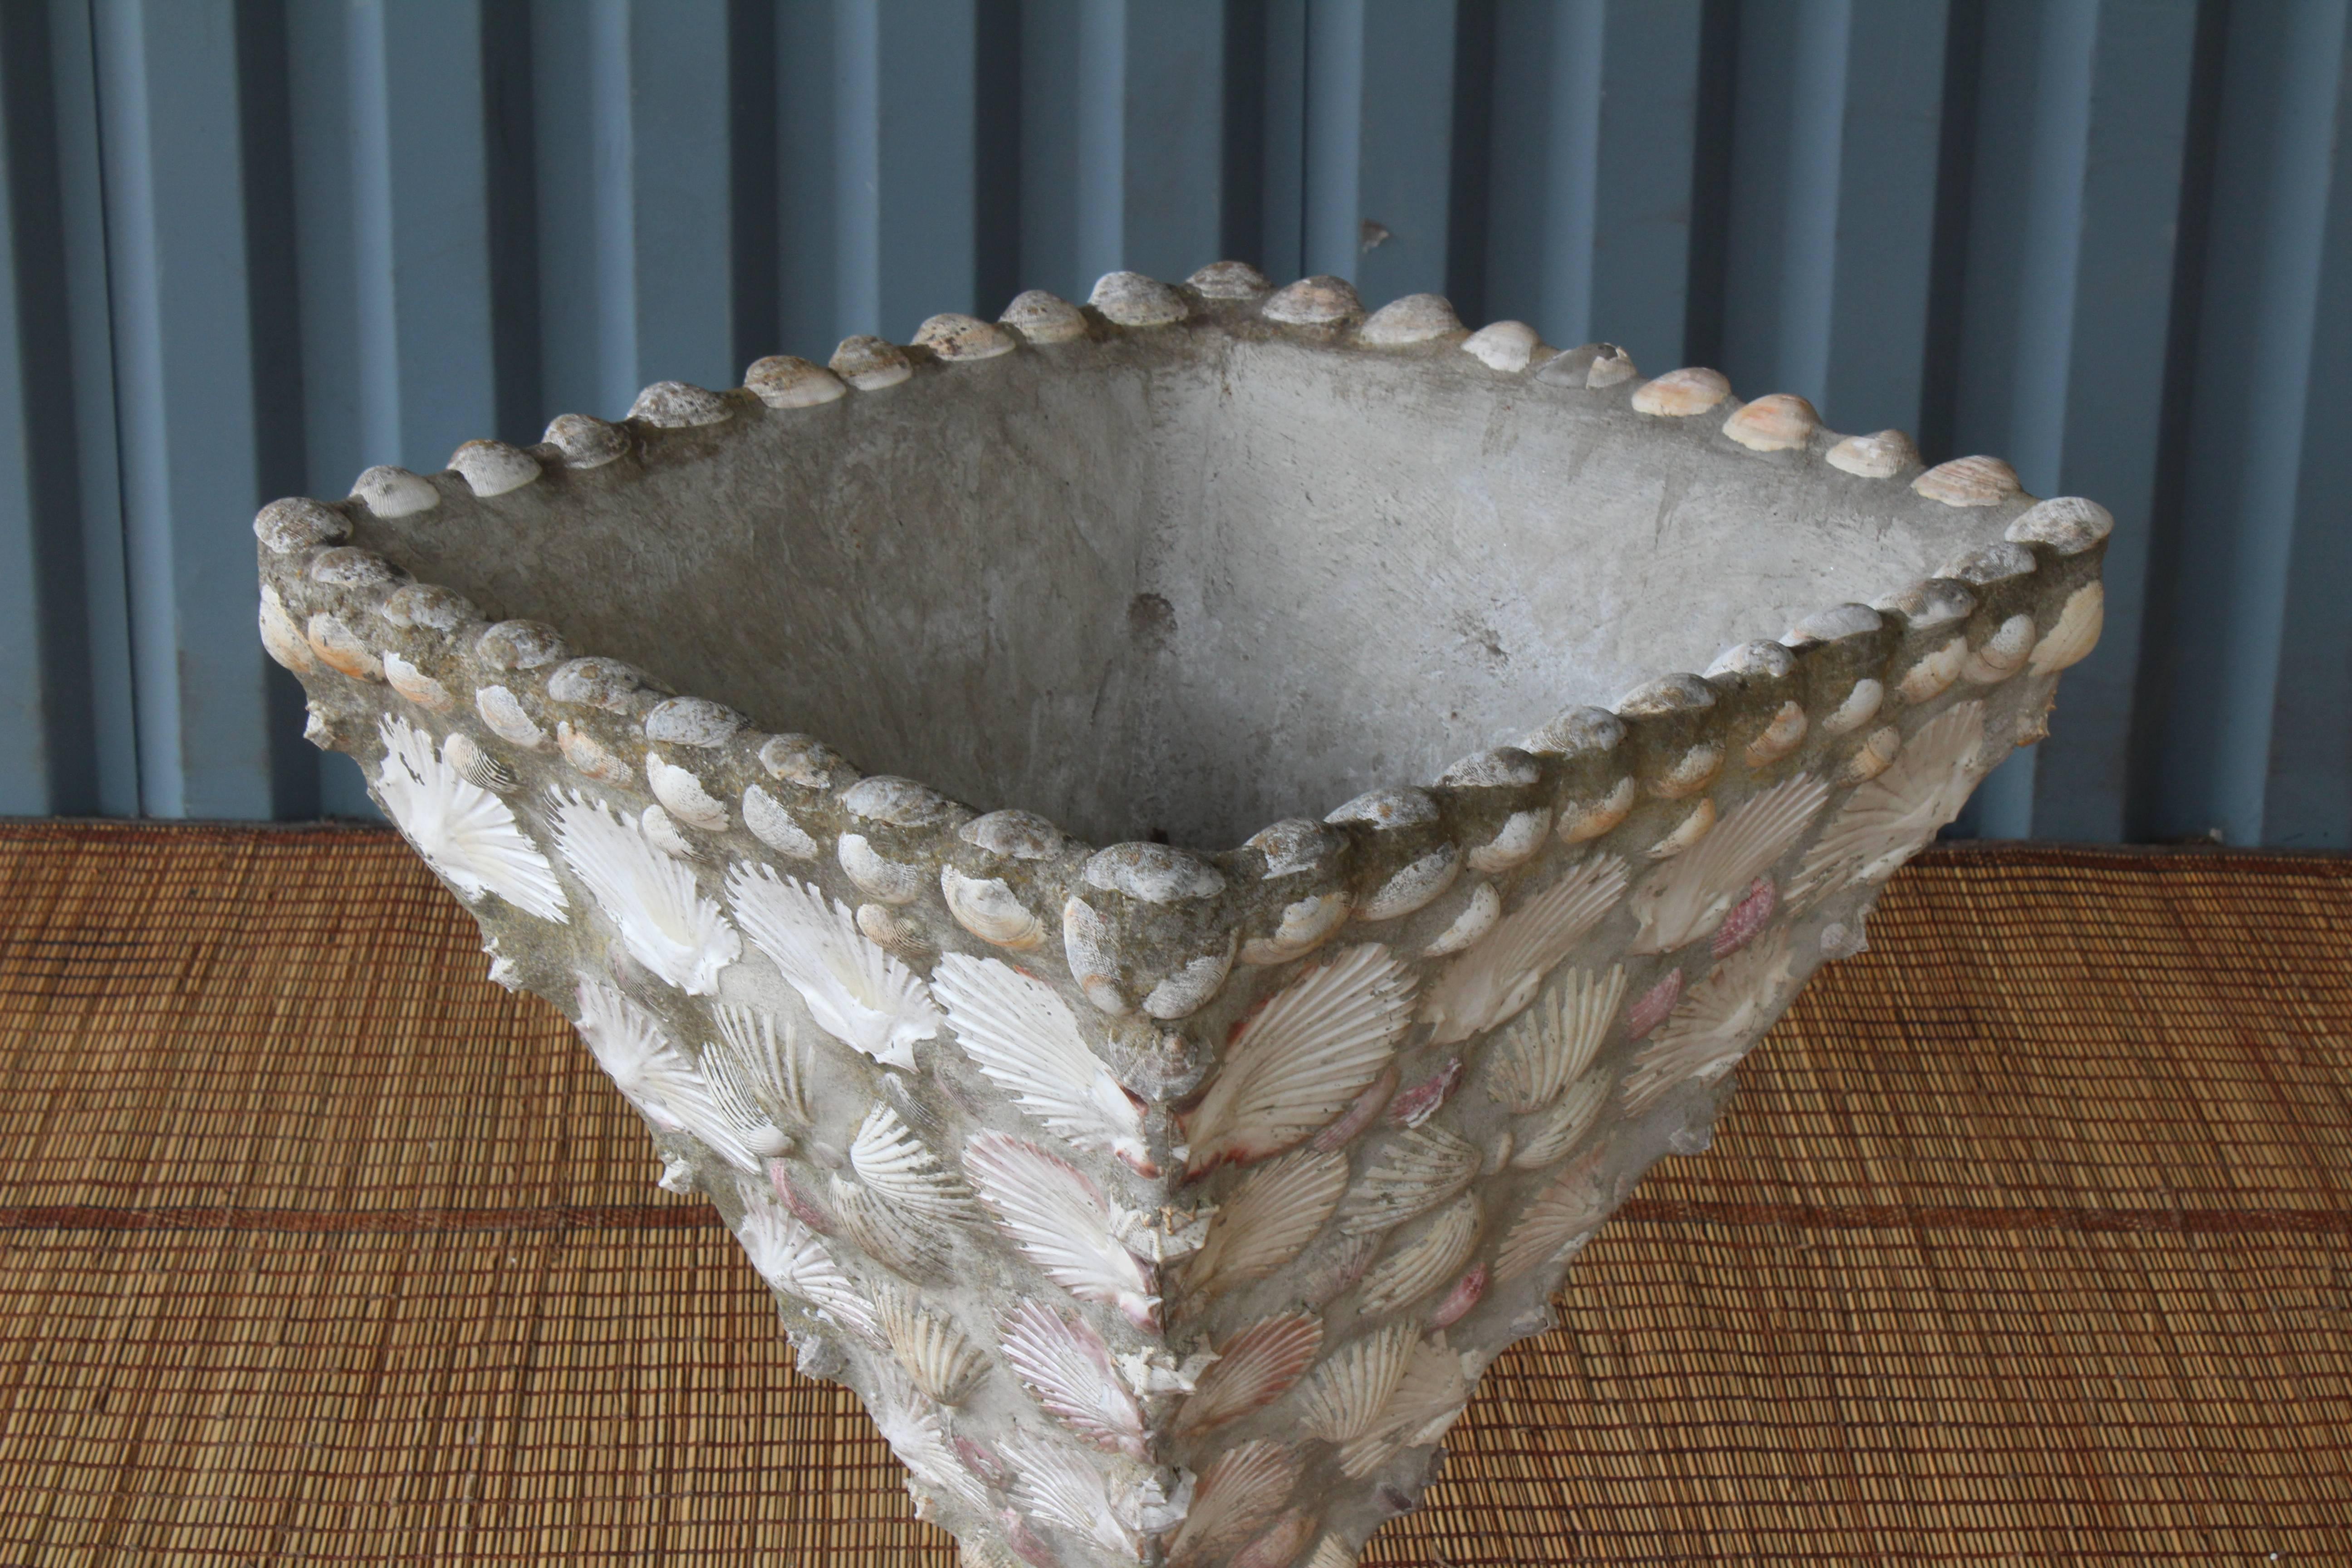 A 1960s concrete planter embossed with various types of sea shells.